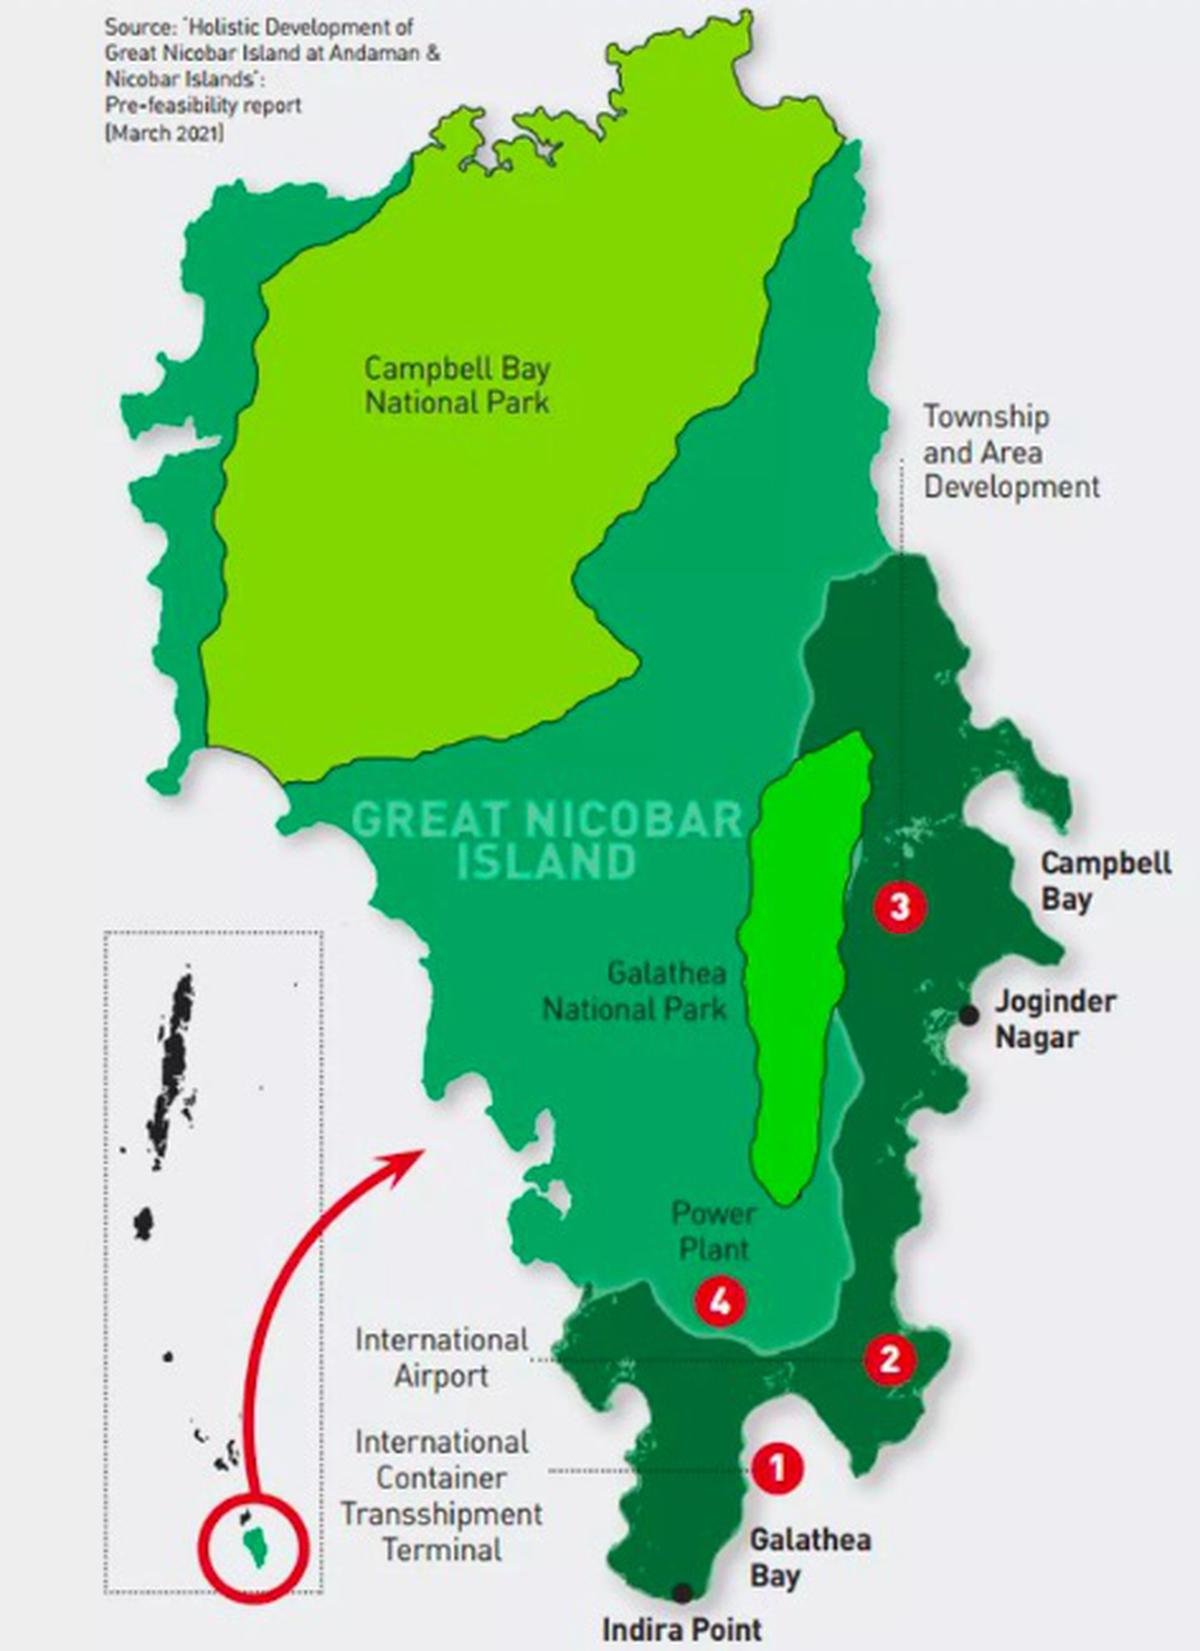 Map of the ₹72,000-crore mega project piloted by NITI Aayog for the “holistic development” of the Great Nicobar Island (GNI). Source: Pre-feasibility report (2021)